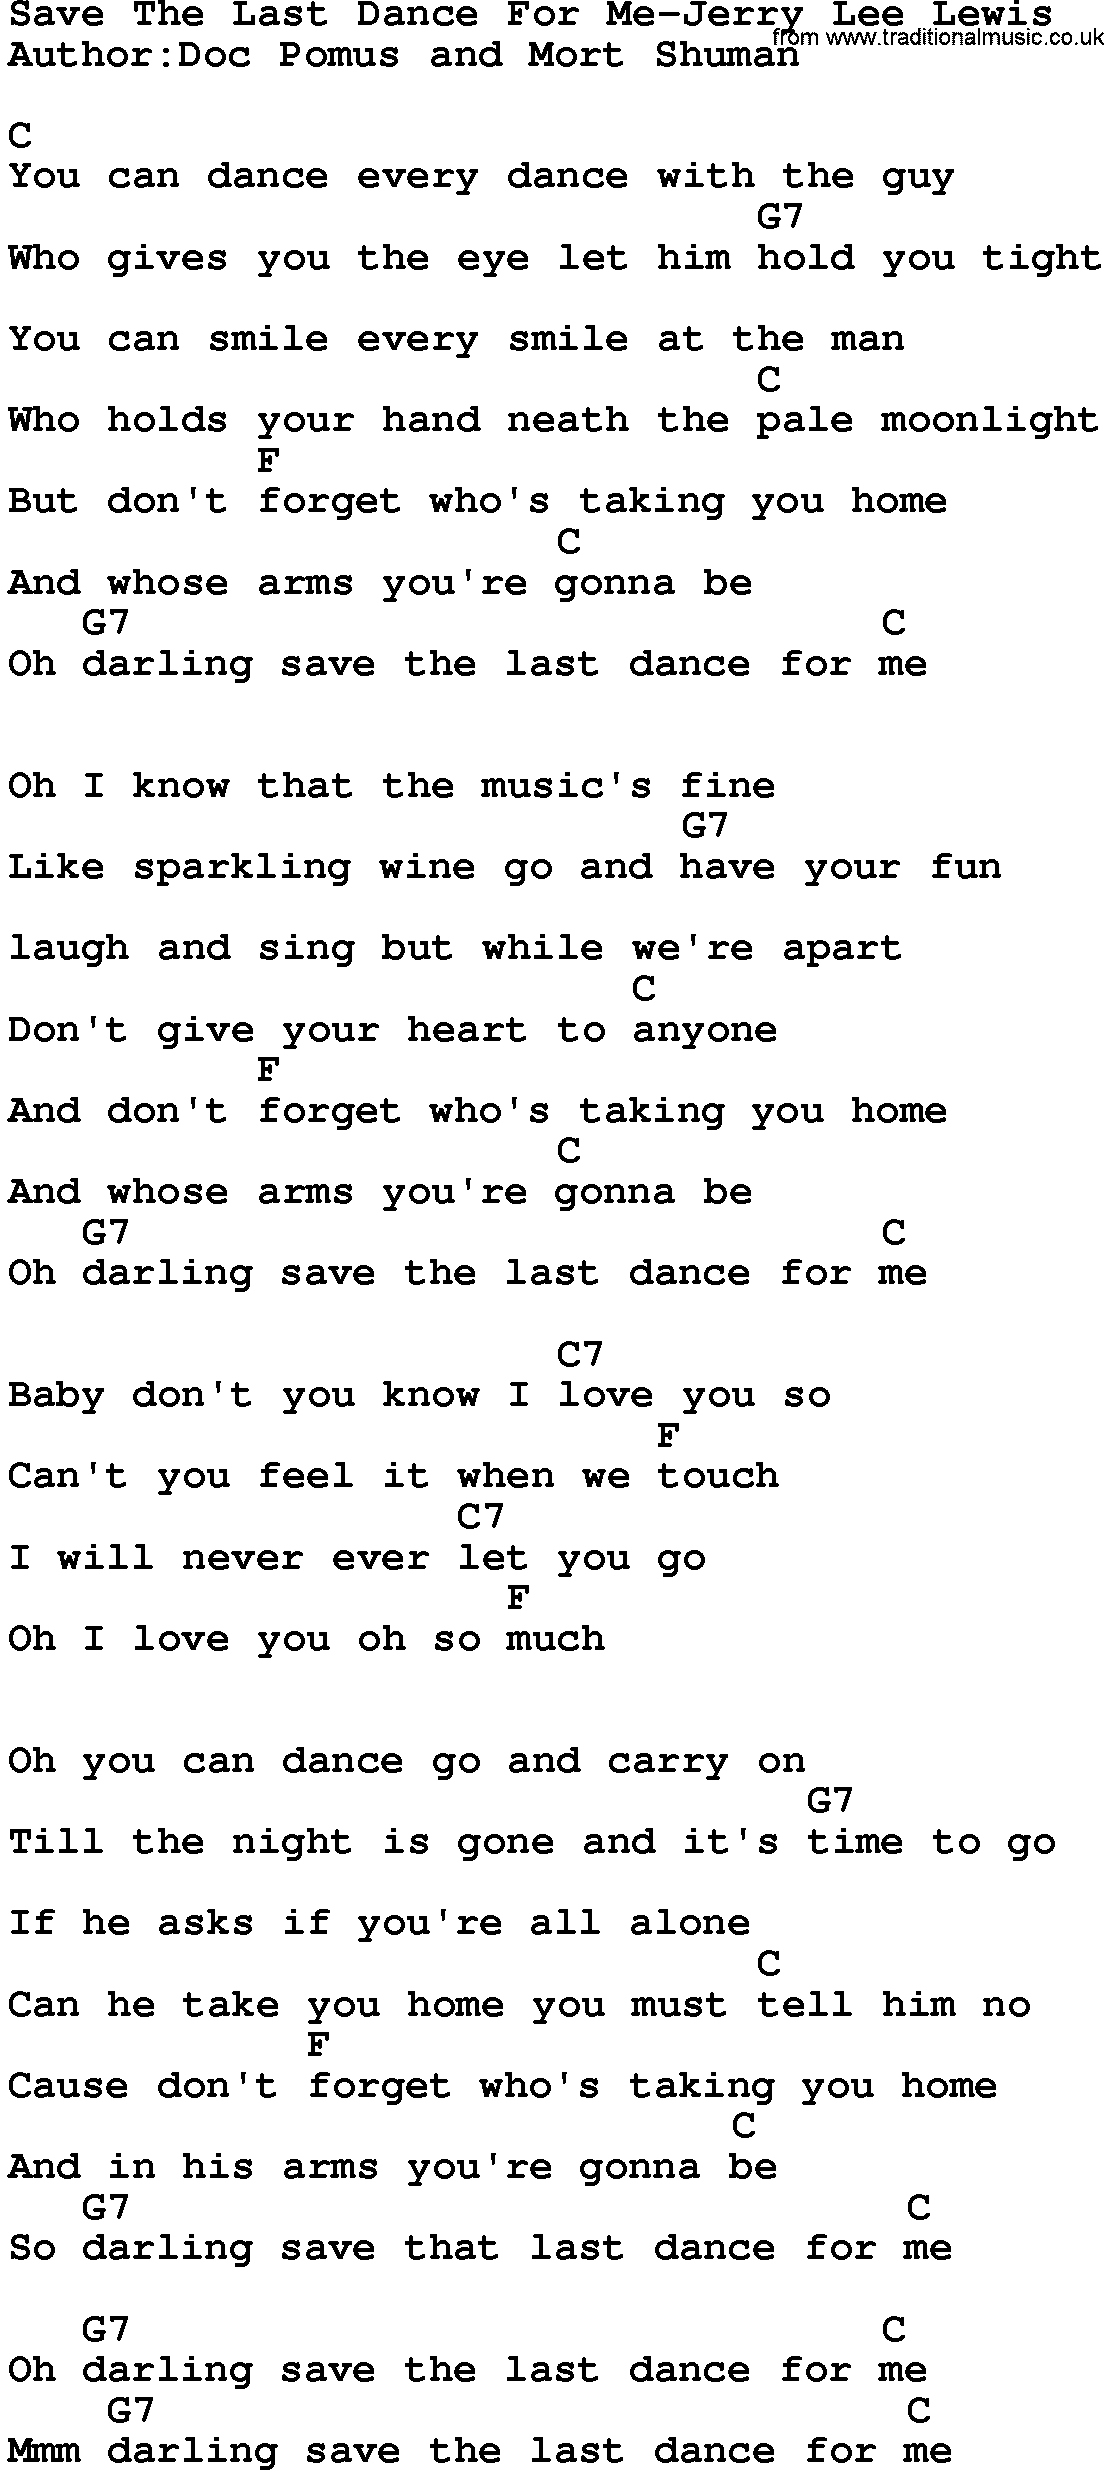 Country music song: Save The Last Dance For Me-Jerry Lee Lewis lyrics and chords